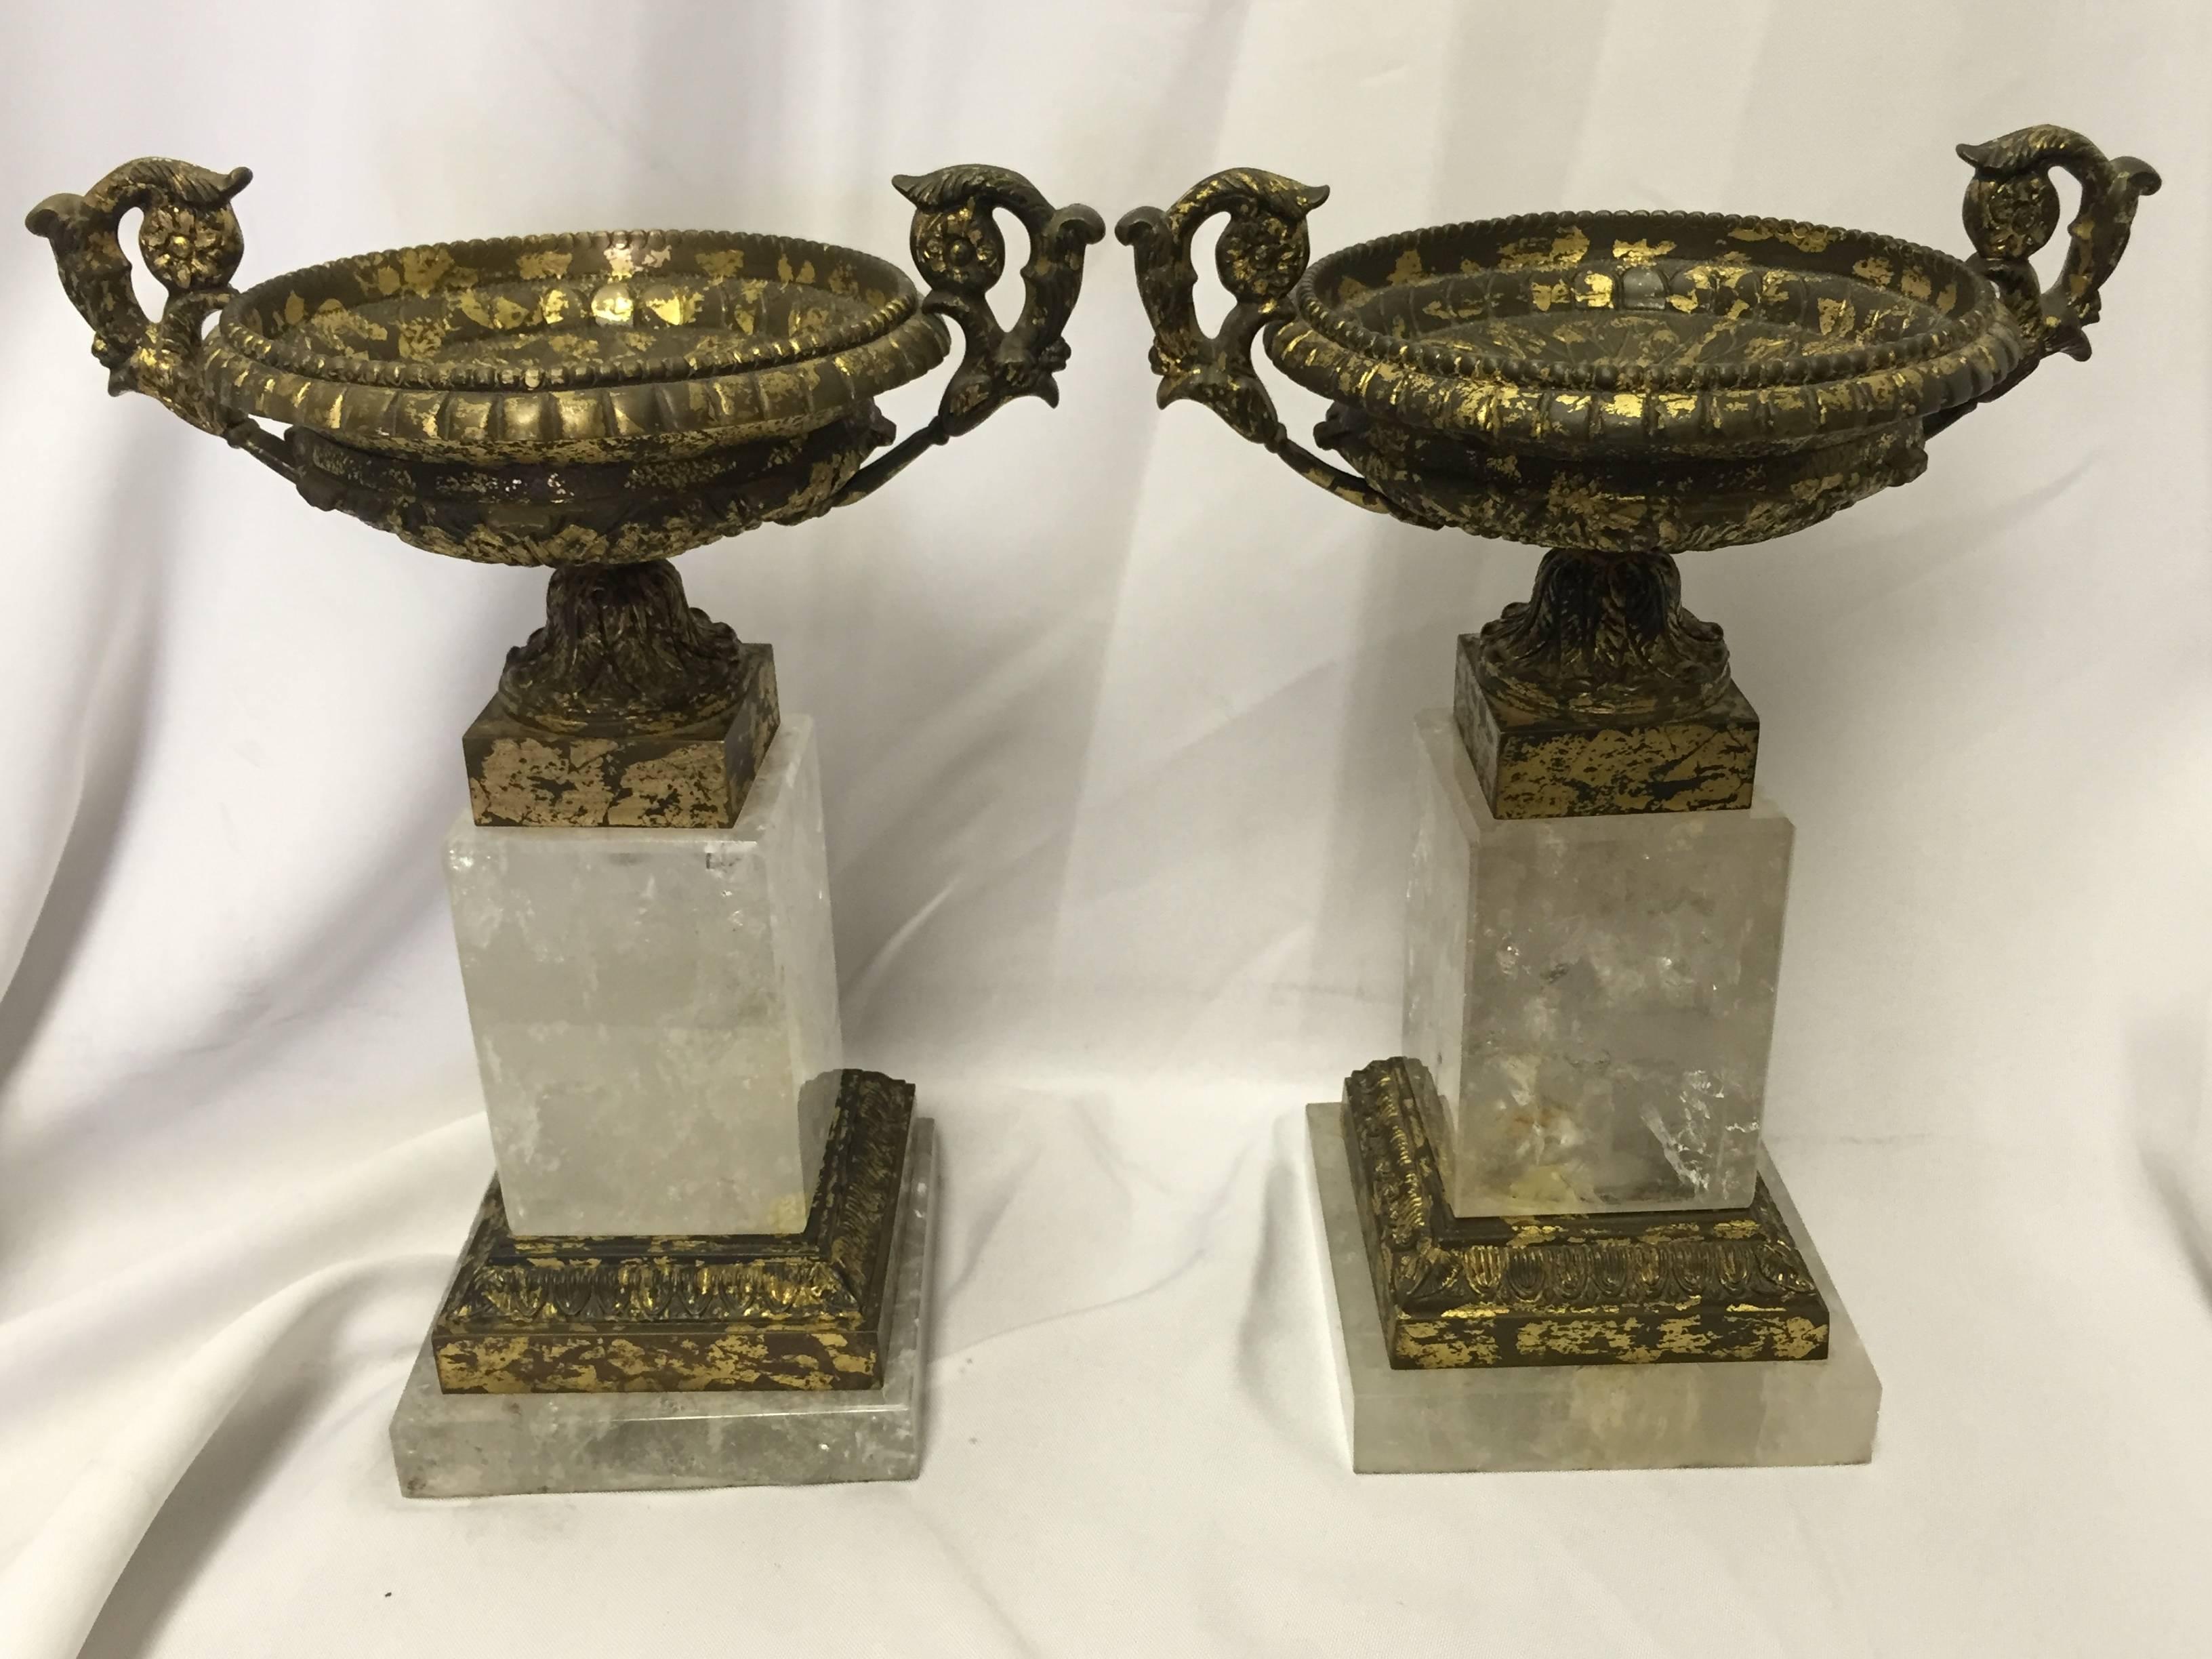 Italian neoclassical style pair of hand-carved and hand polished rock crystal and gilt bronze tazzas, mid-20th century.

Base measurement is 4.25 inches x 4.25 inches.